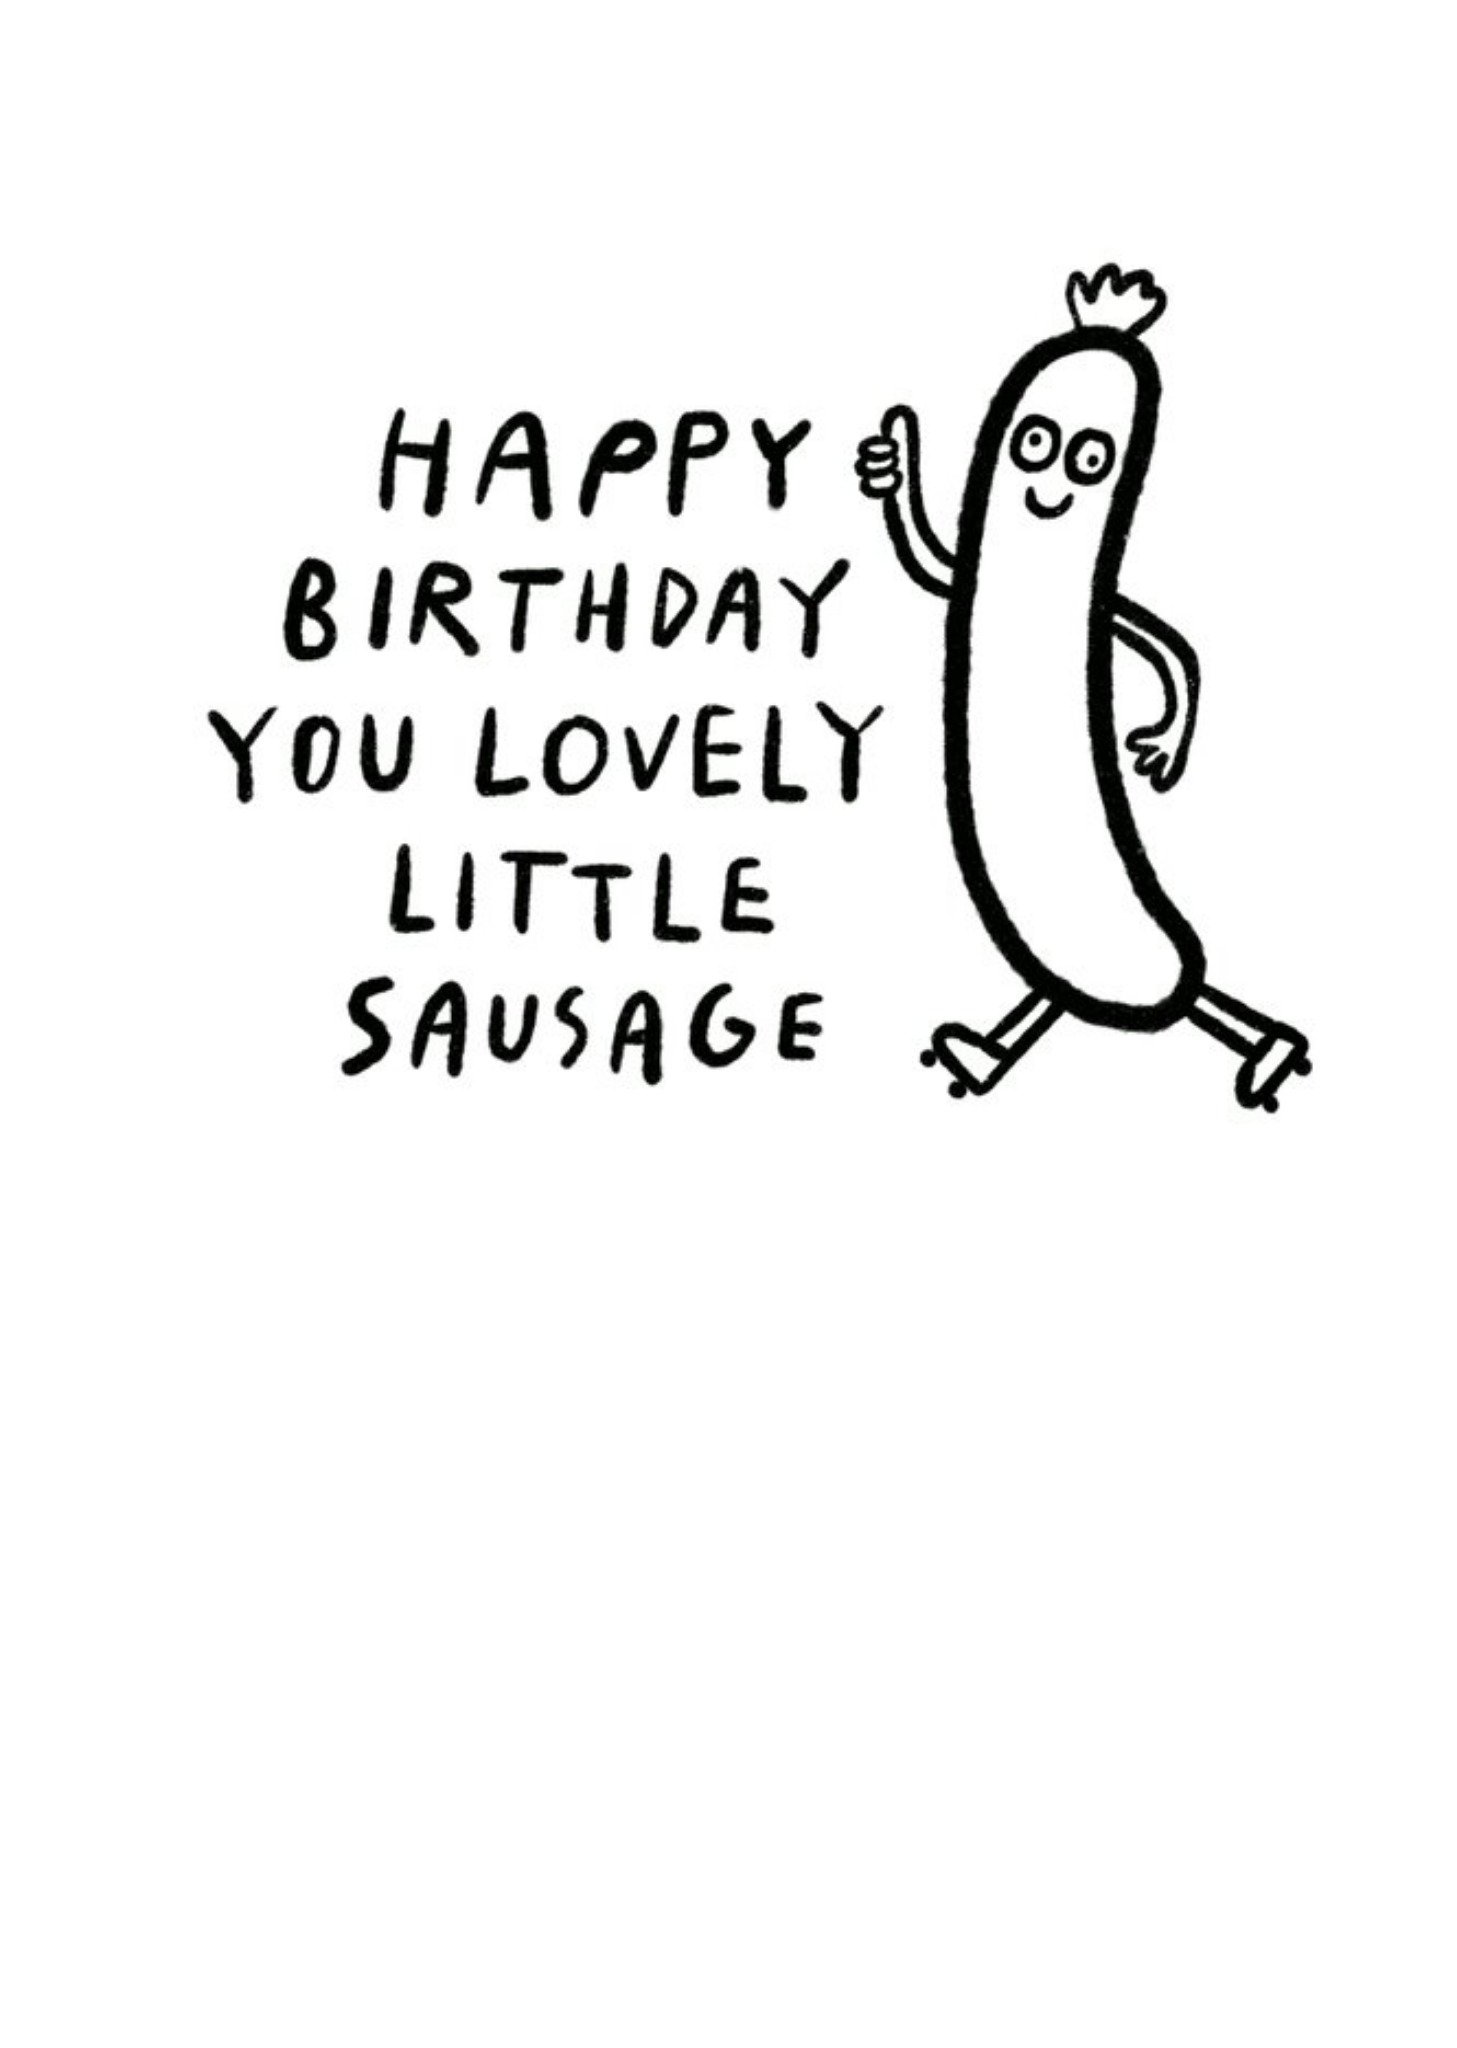 Moonpig Pigment Lovely Little Sausage Funny Quirky Illustrated Birthday Card, Large